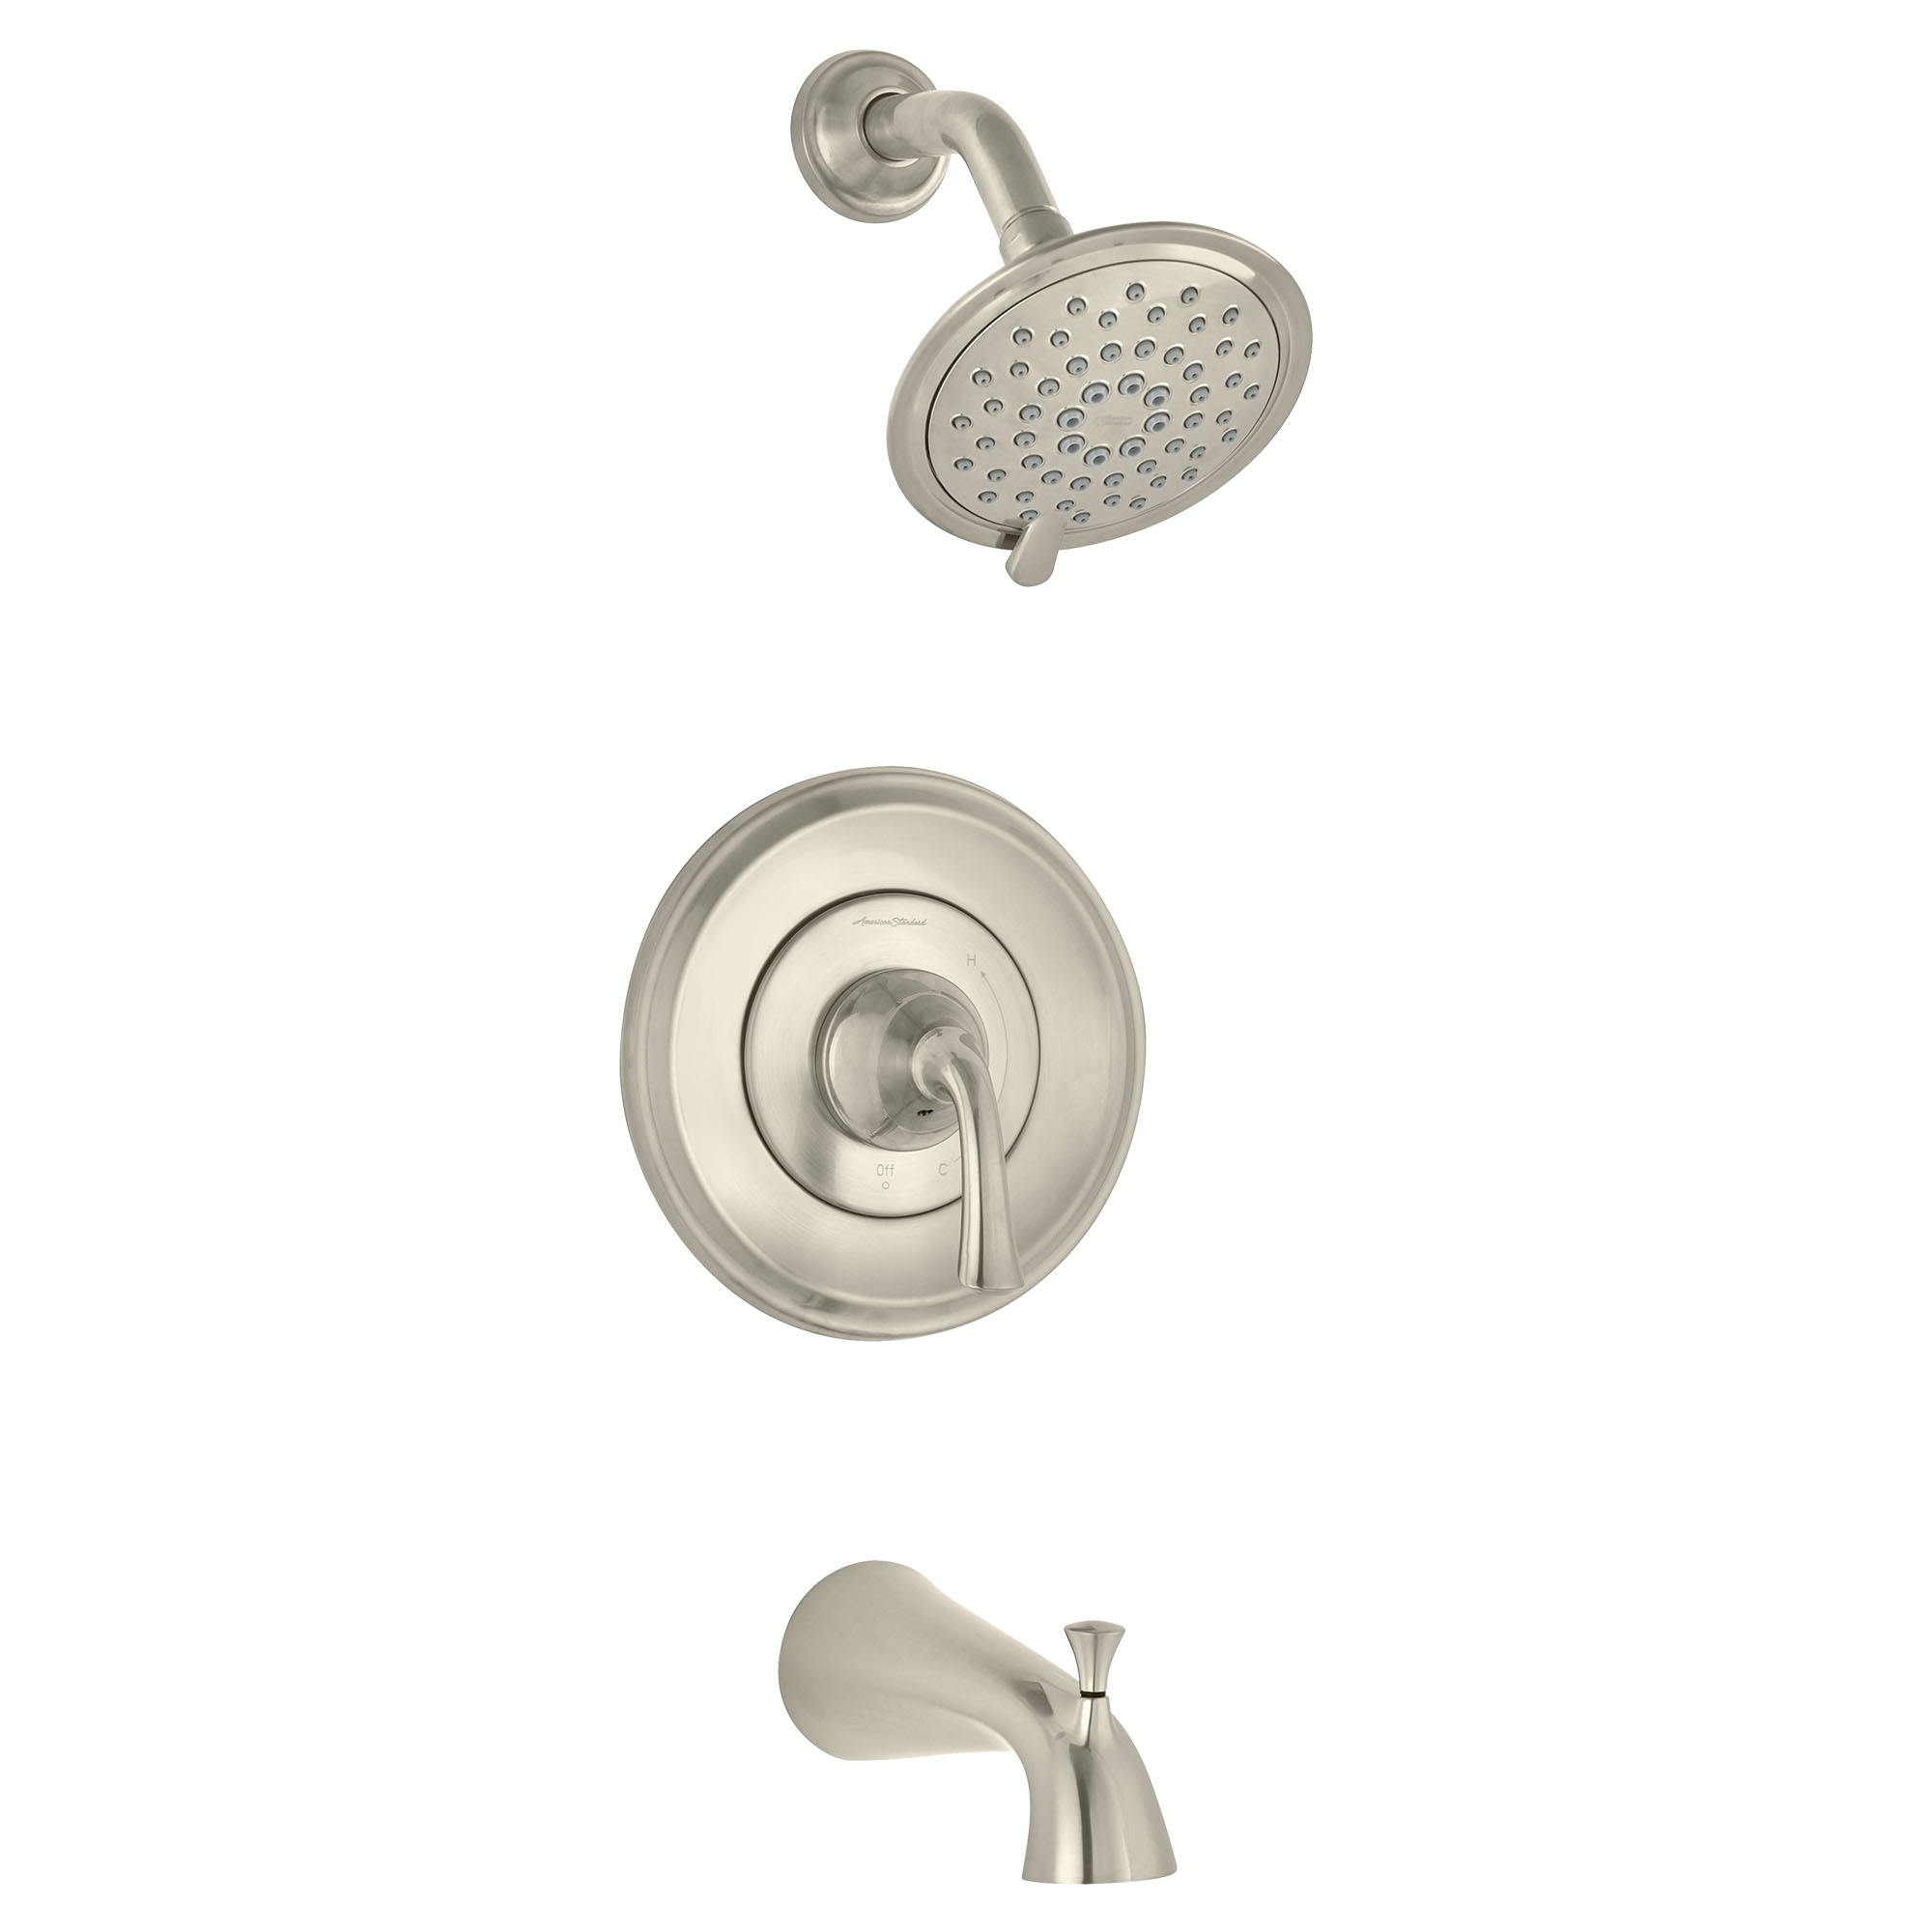 Patience® 1.8 gpm/6.6 L/min Tub and Shower Trim Kit With Water-Saving 3-Function Showerhead, Double Ceramic Pressure Balance Cartridge With Lever Handle